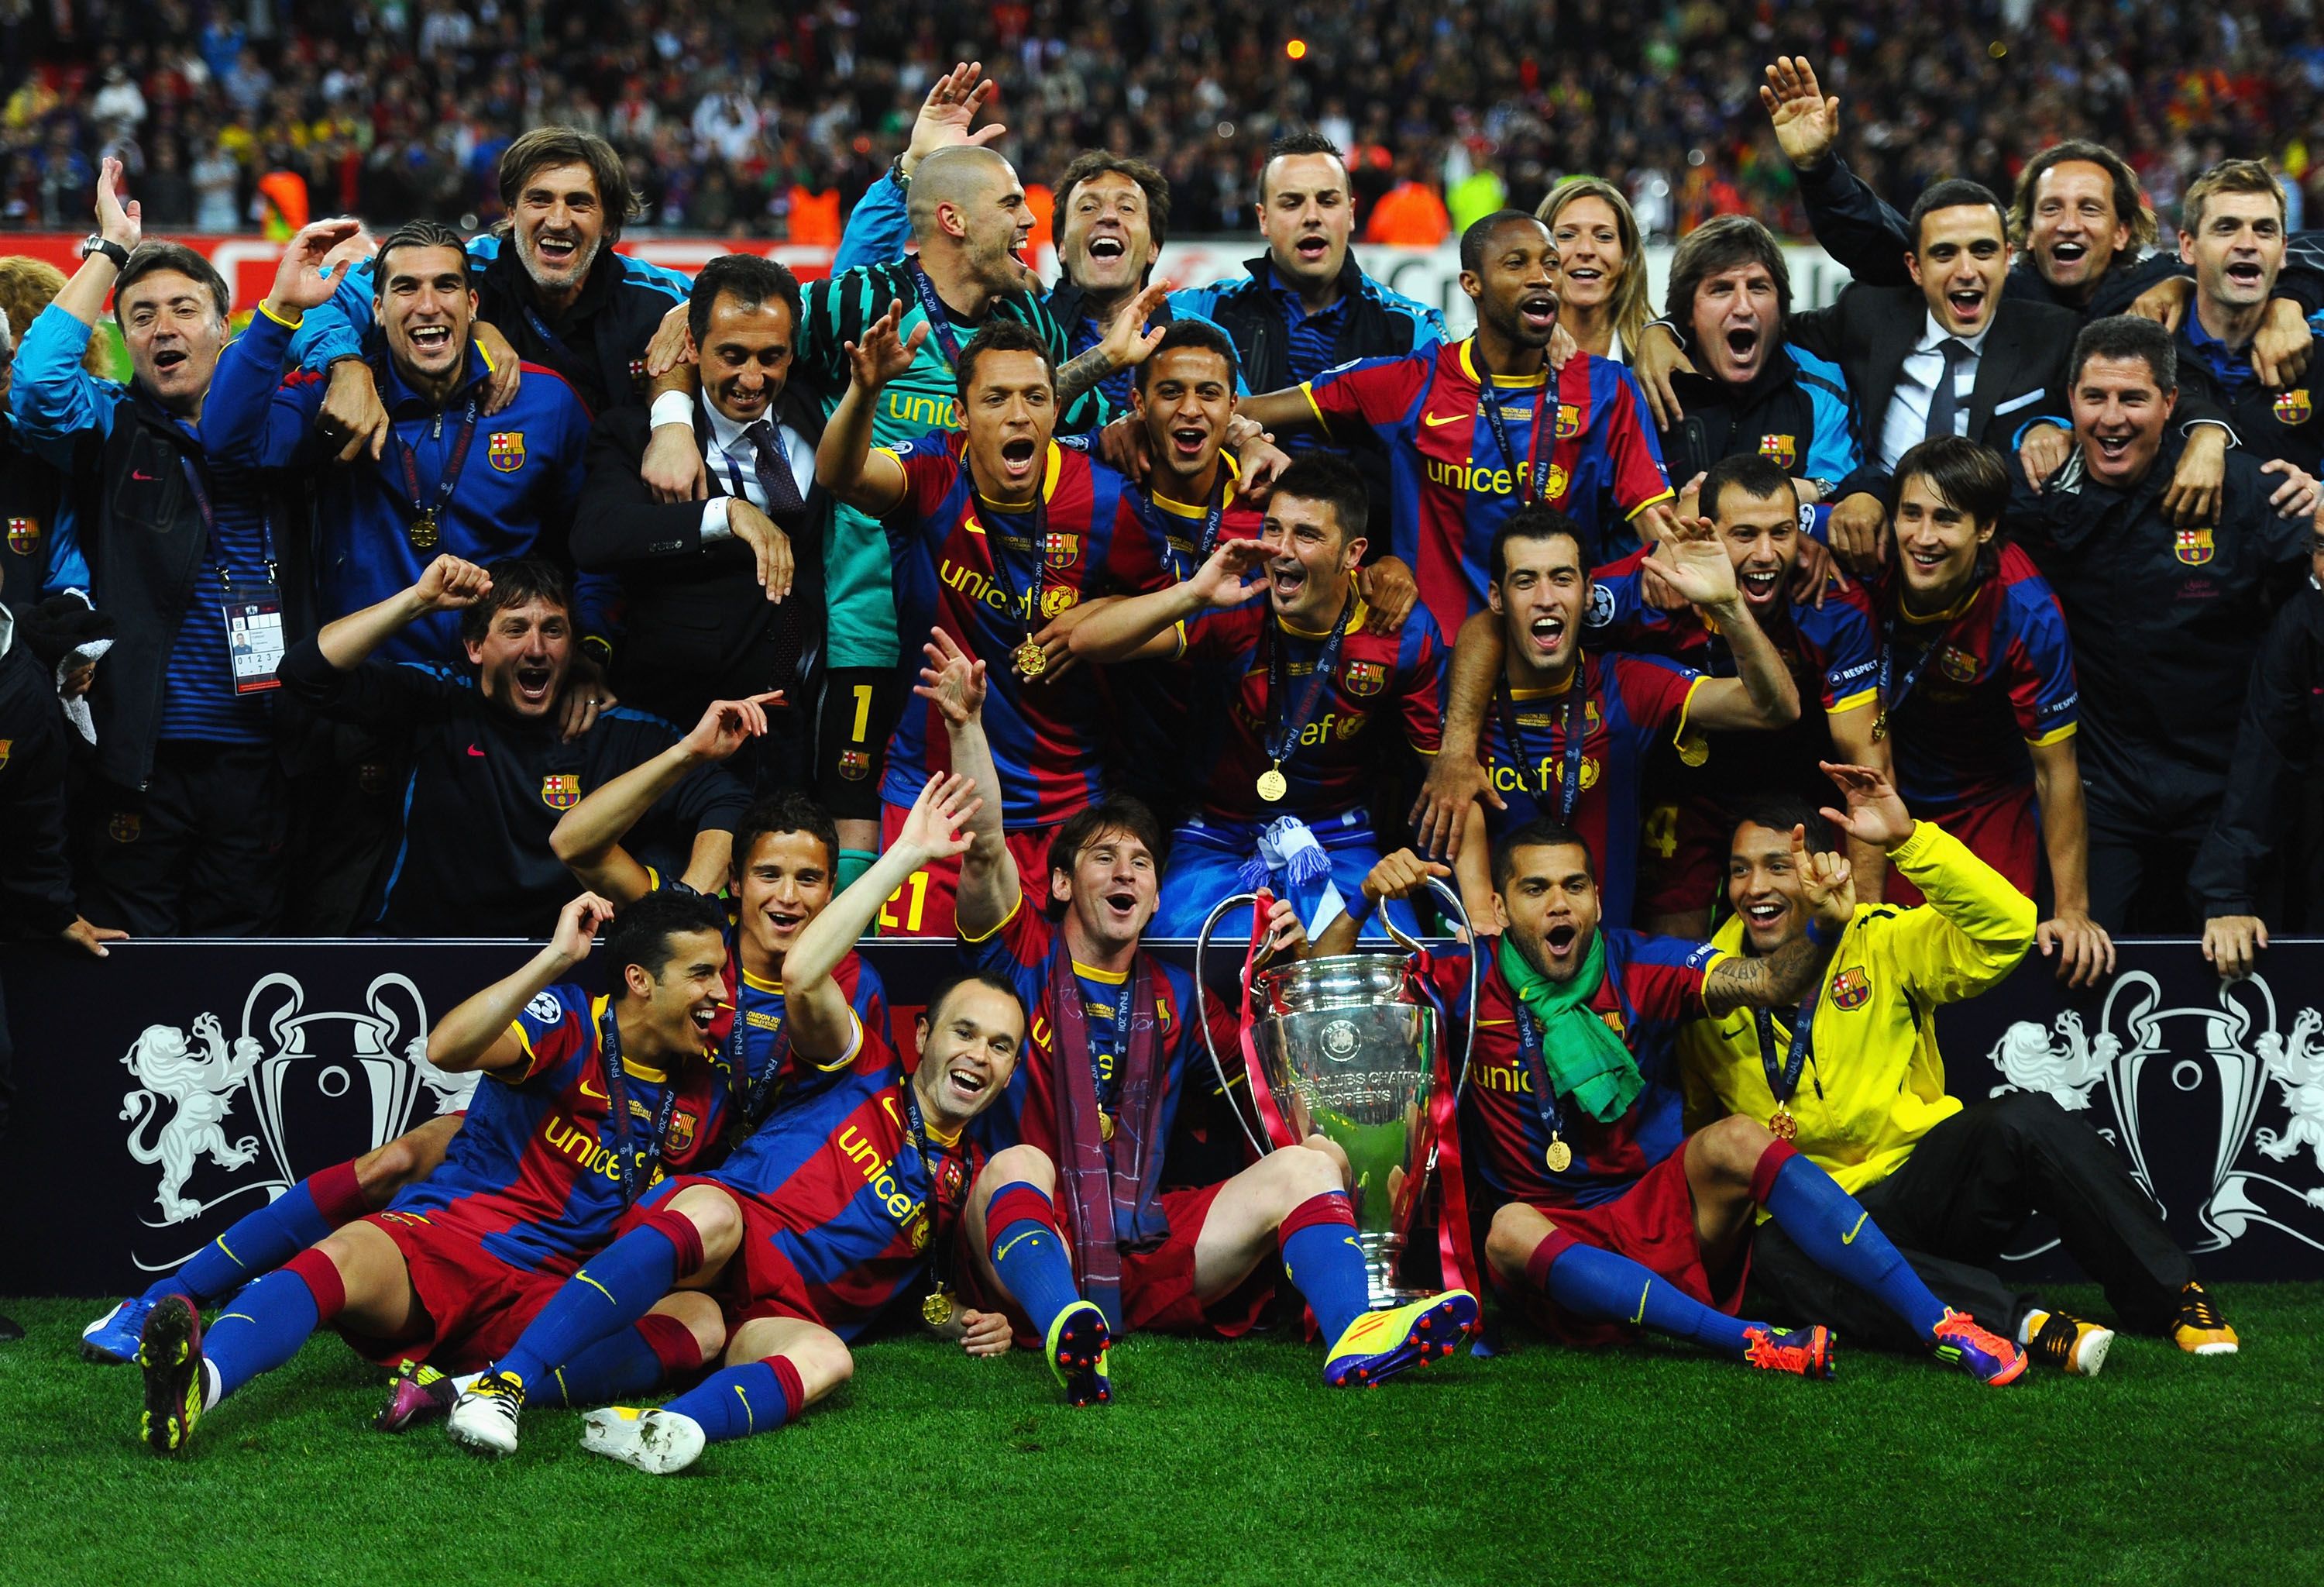 Barcelona after winning the 2011 Champions League final